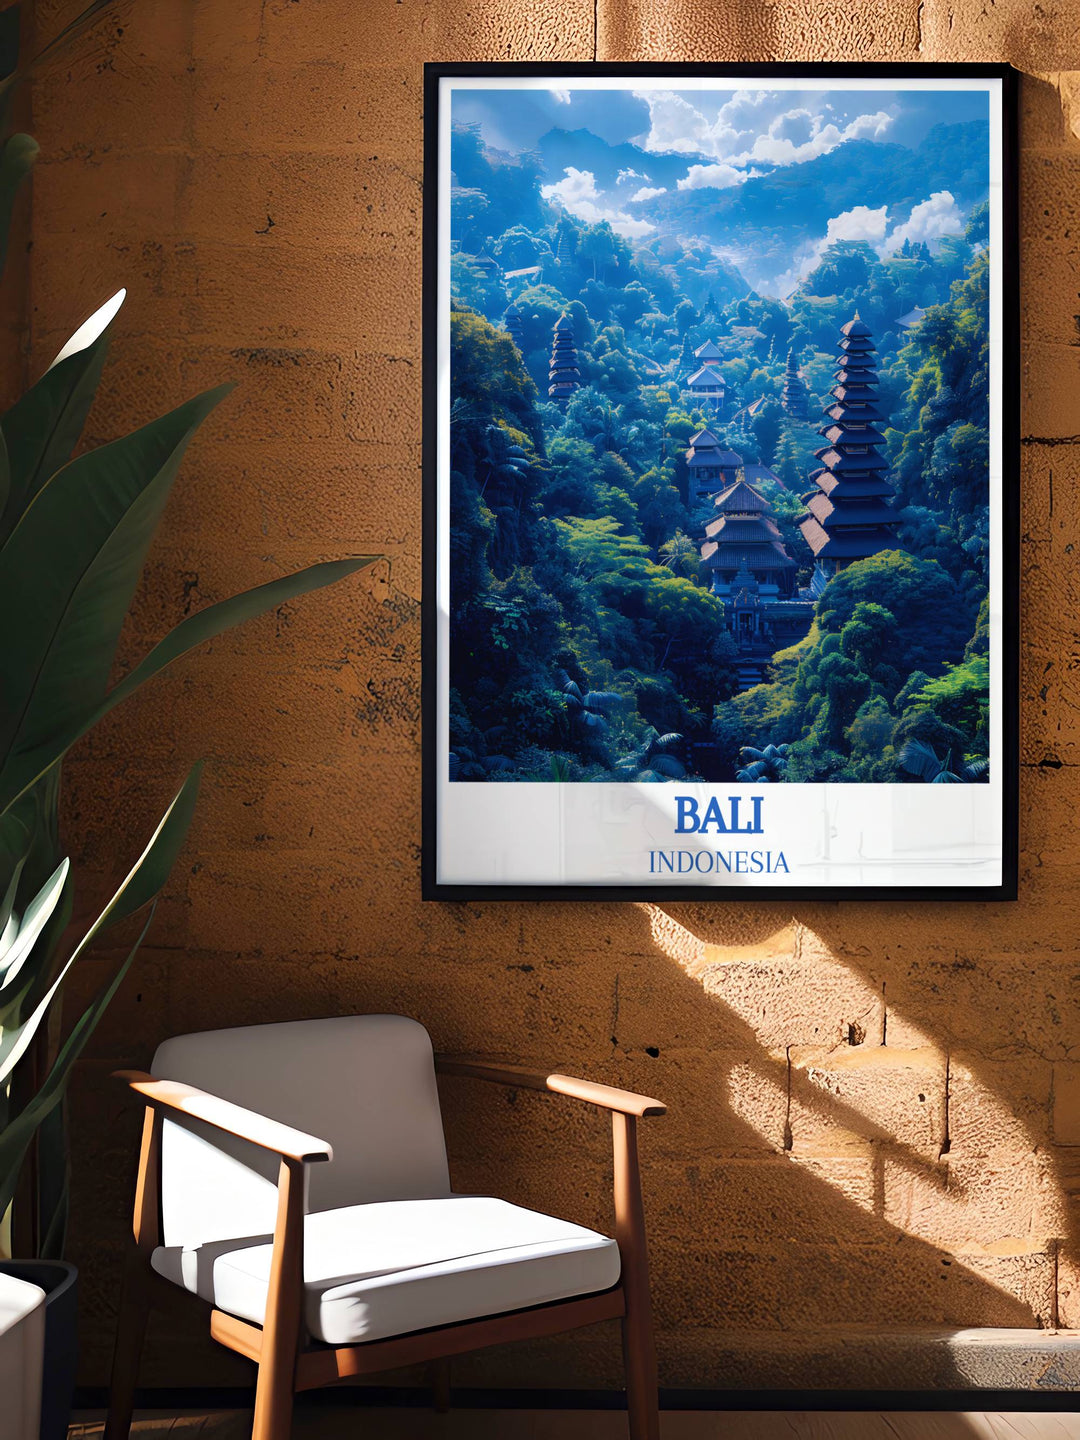 Ubud Monkey Forest print capturing the lush greenery and playful monkeys in their natural habitat, a stunning addition to any home decor.